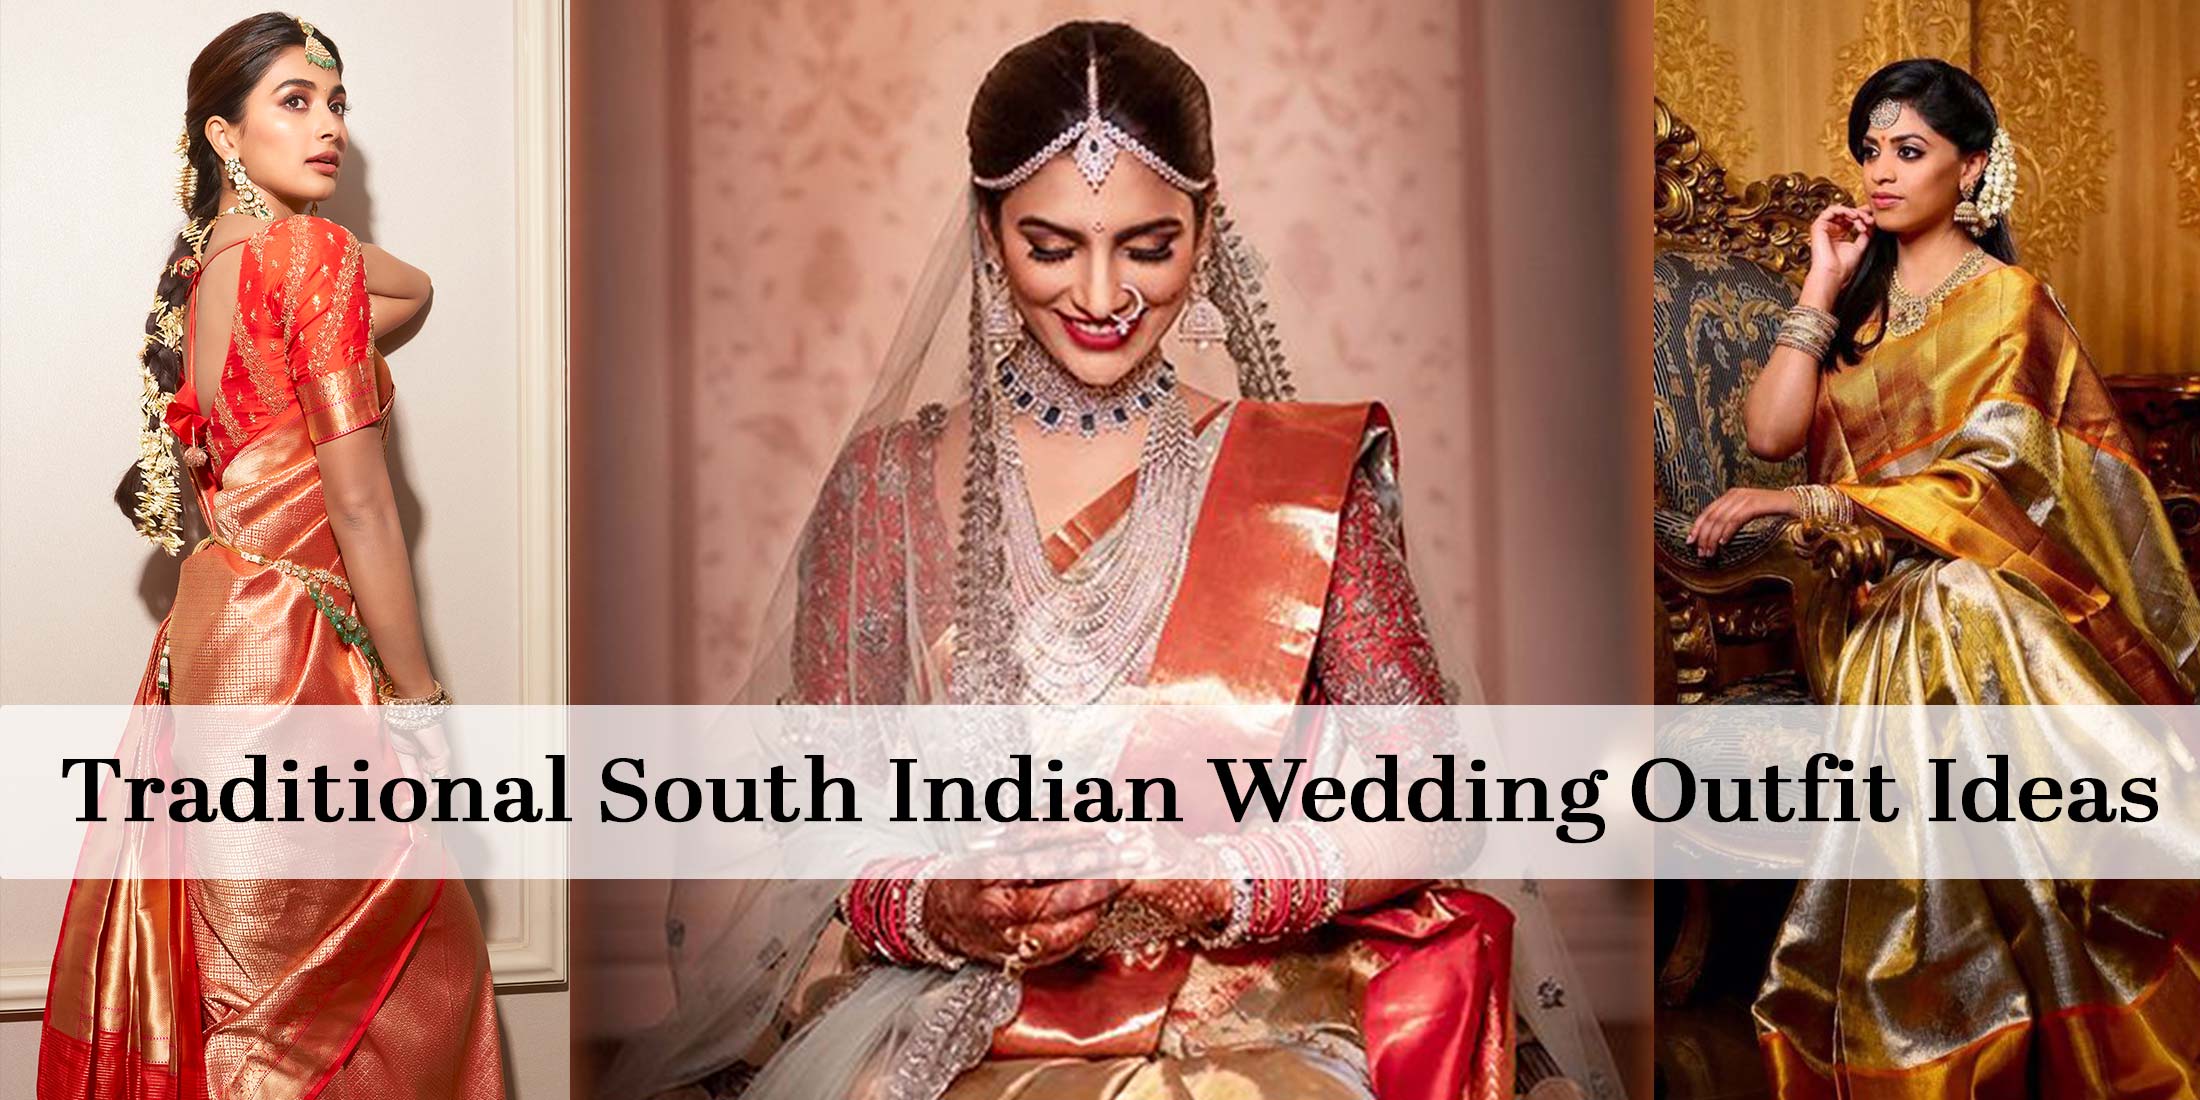 Top 10 South Indian Bridal Look For Your Wedding Day